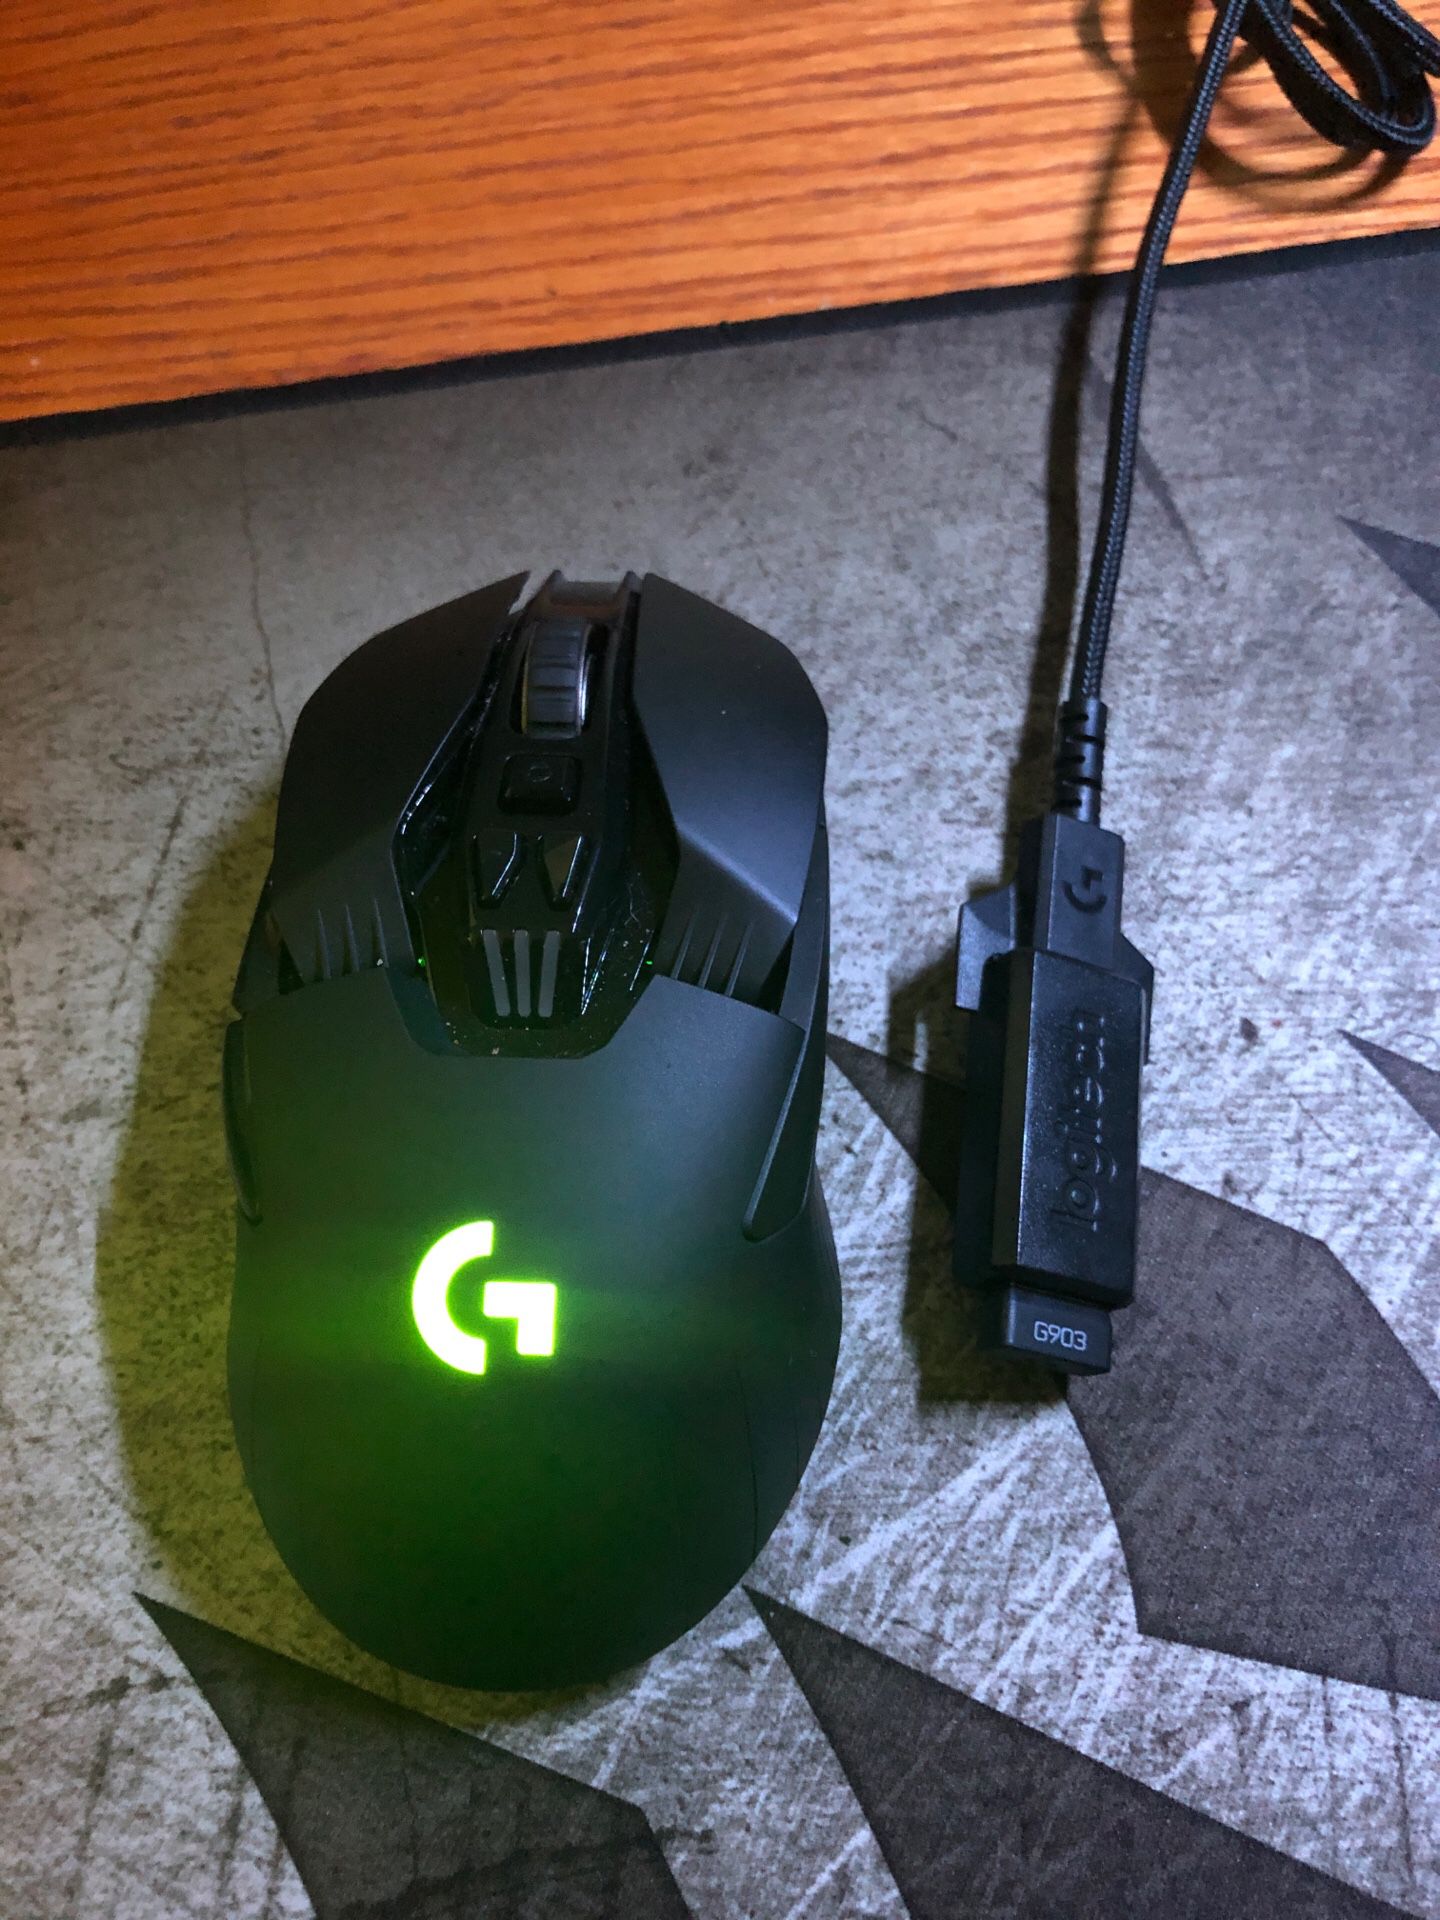 G903 wireless mouse